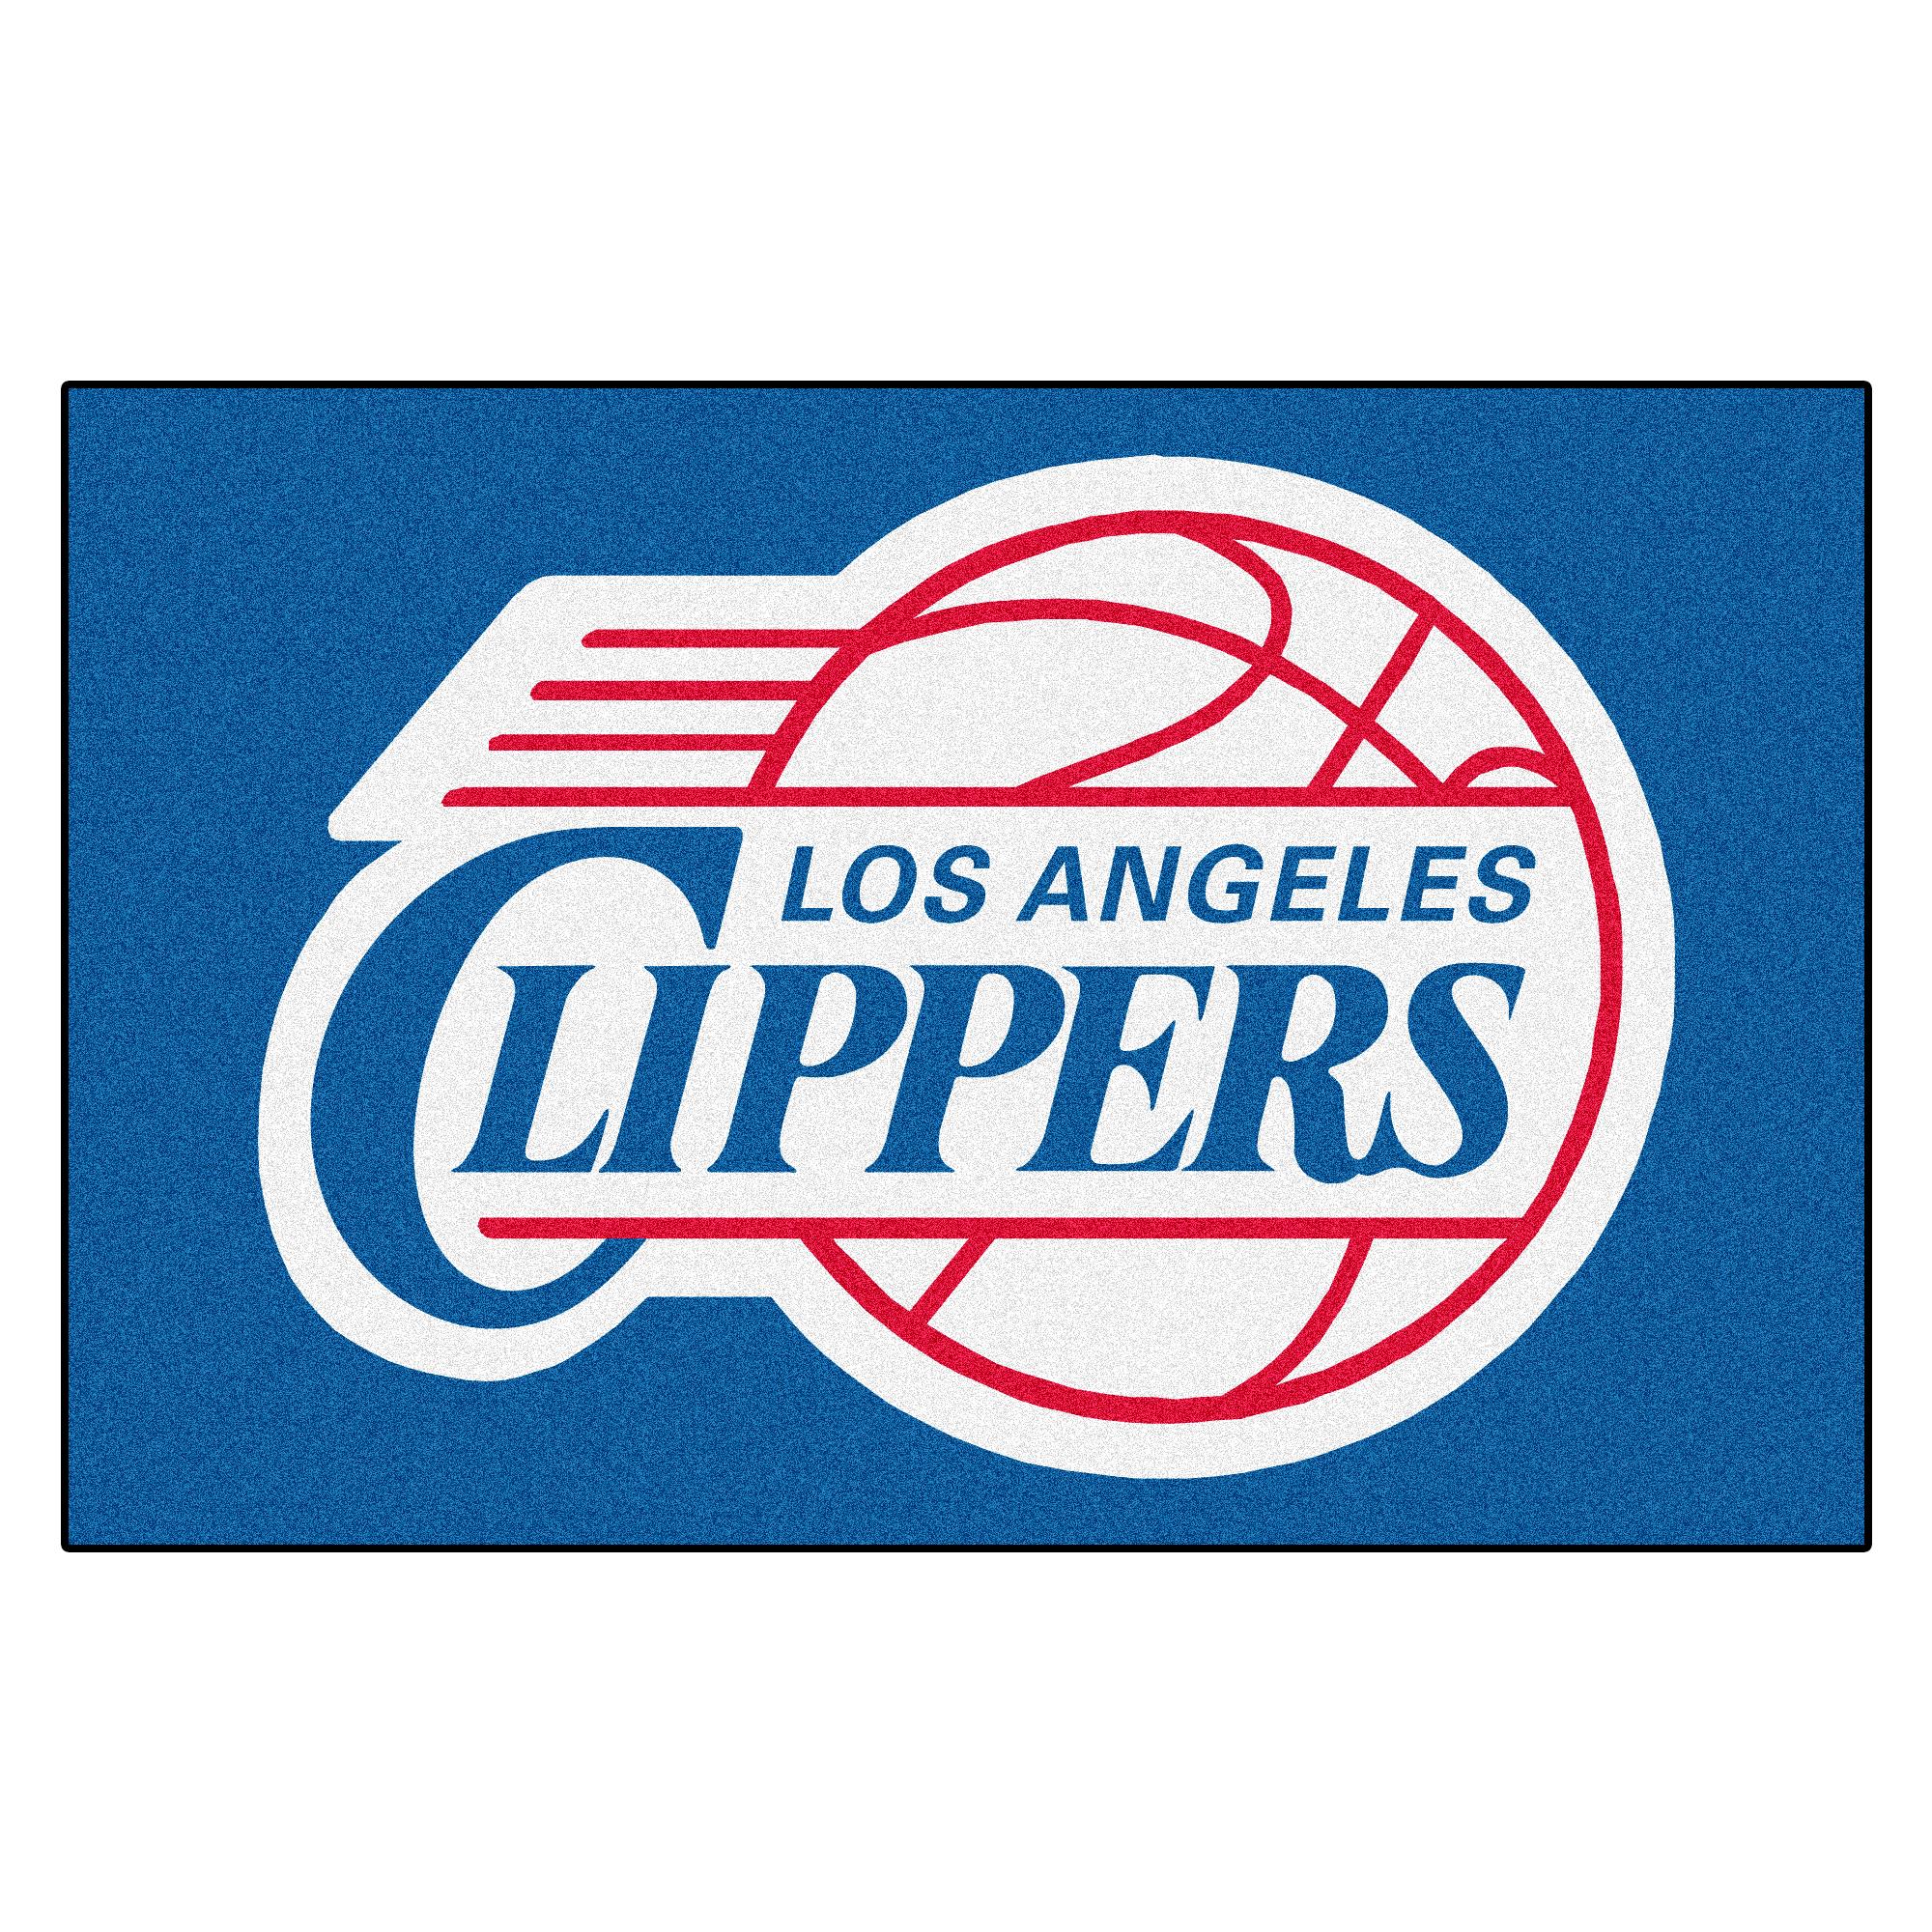 Clippers , HD Wallpaper & Backgrounds